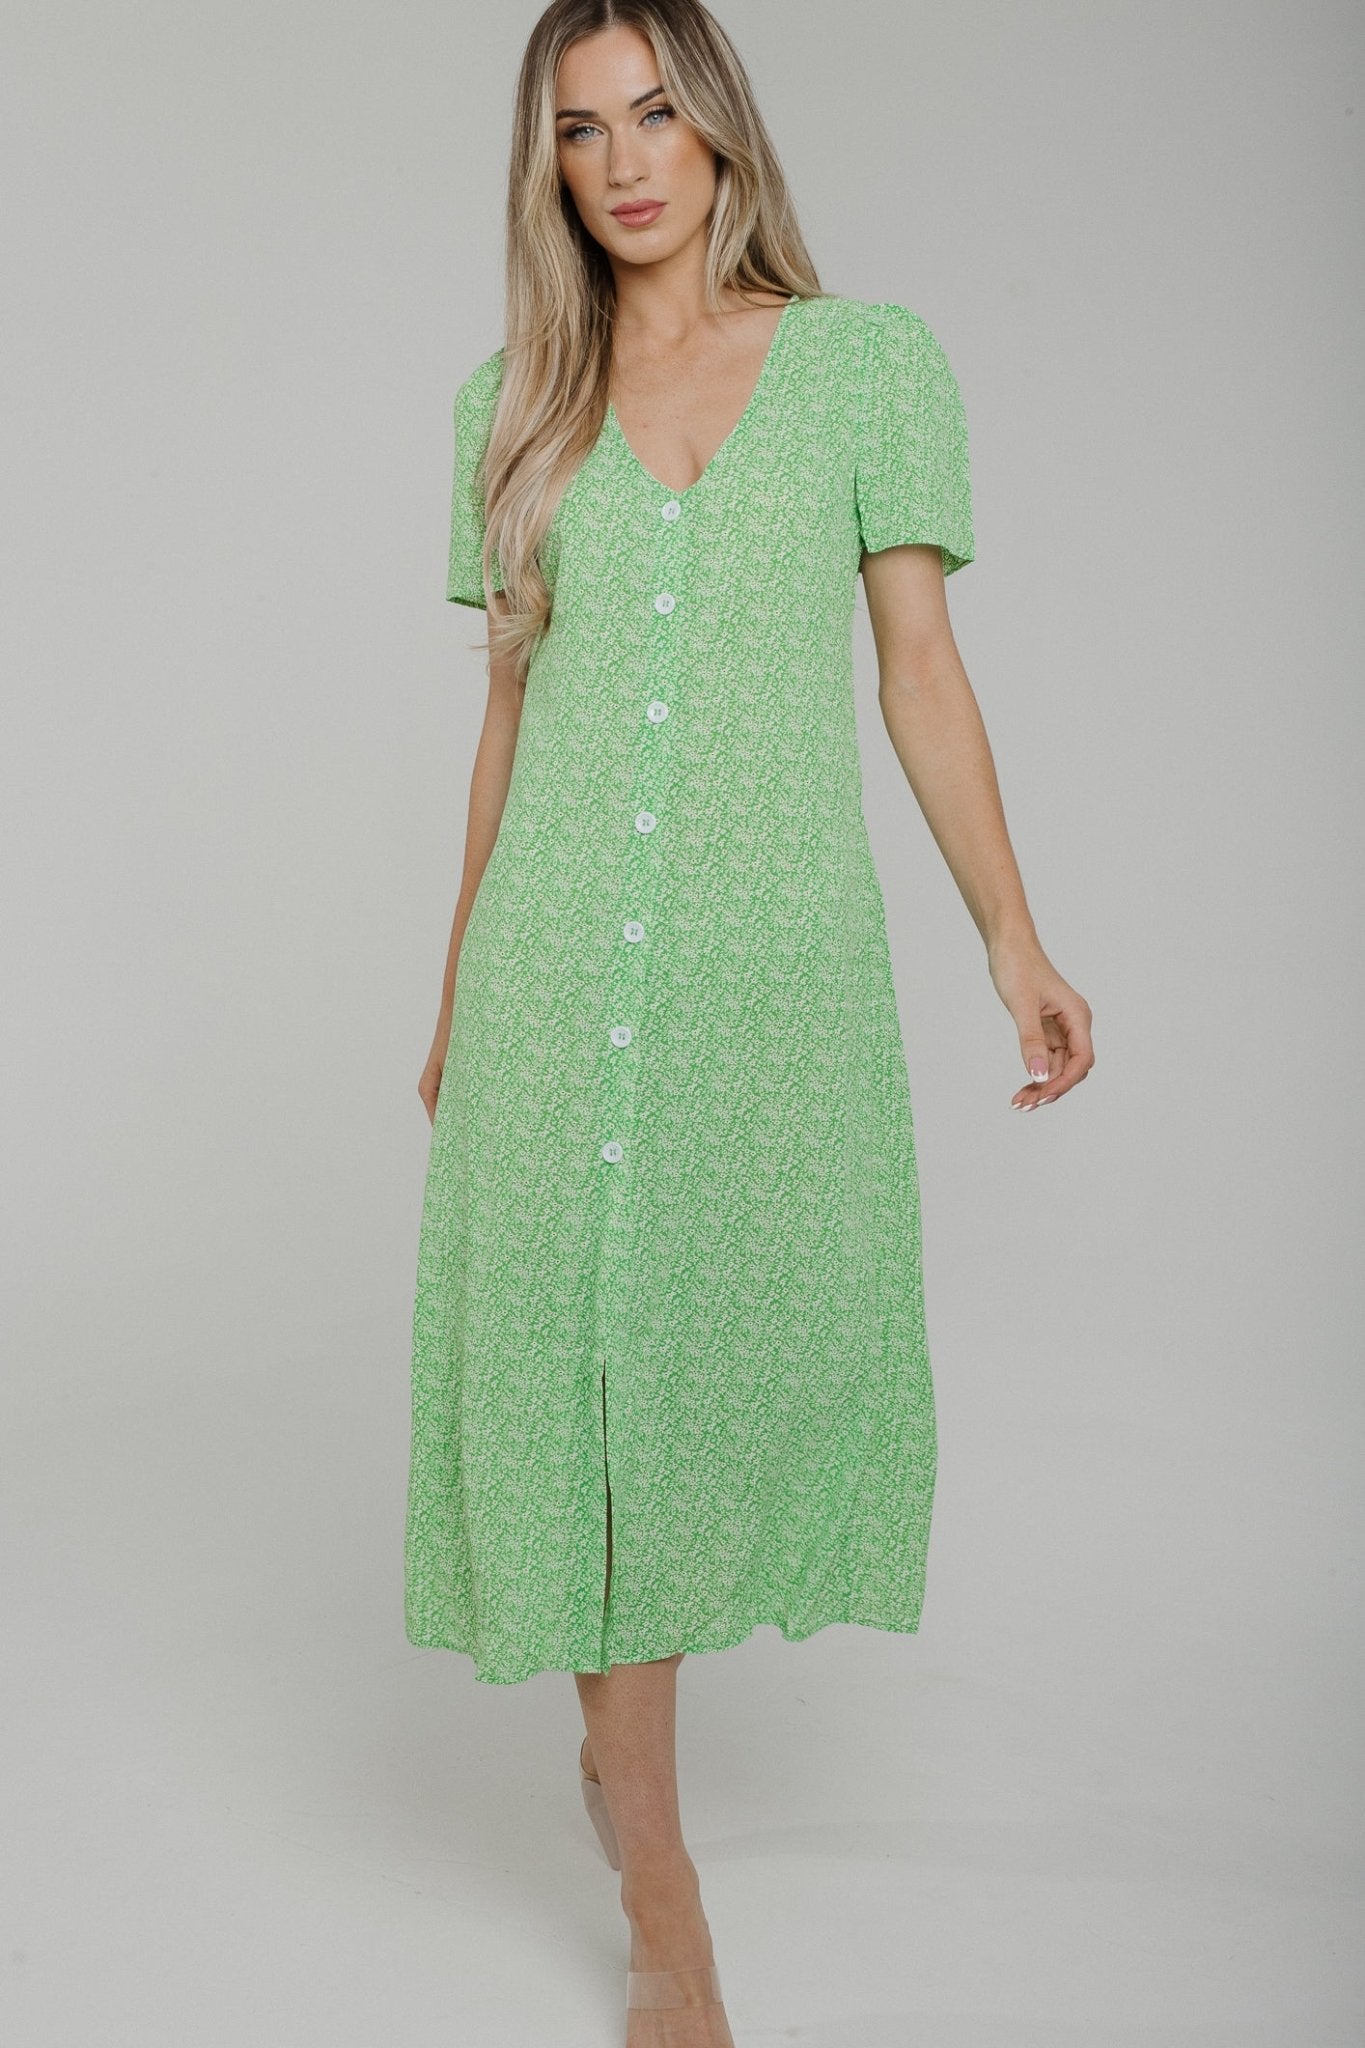 Lucy Button Front Dress In Green Print - The Walk in Wardrobe